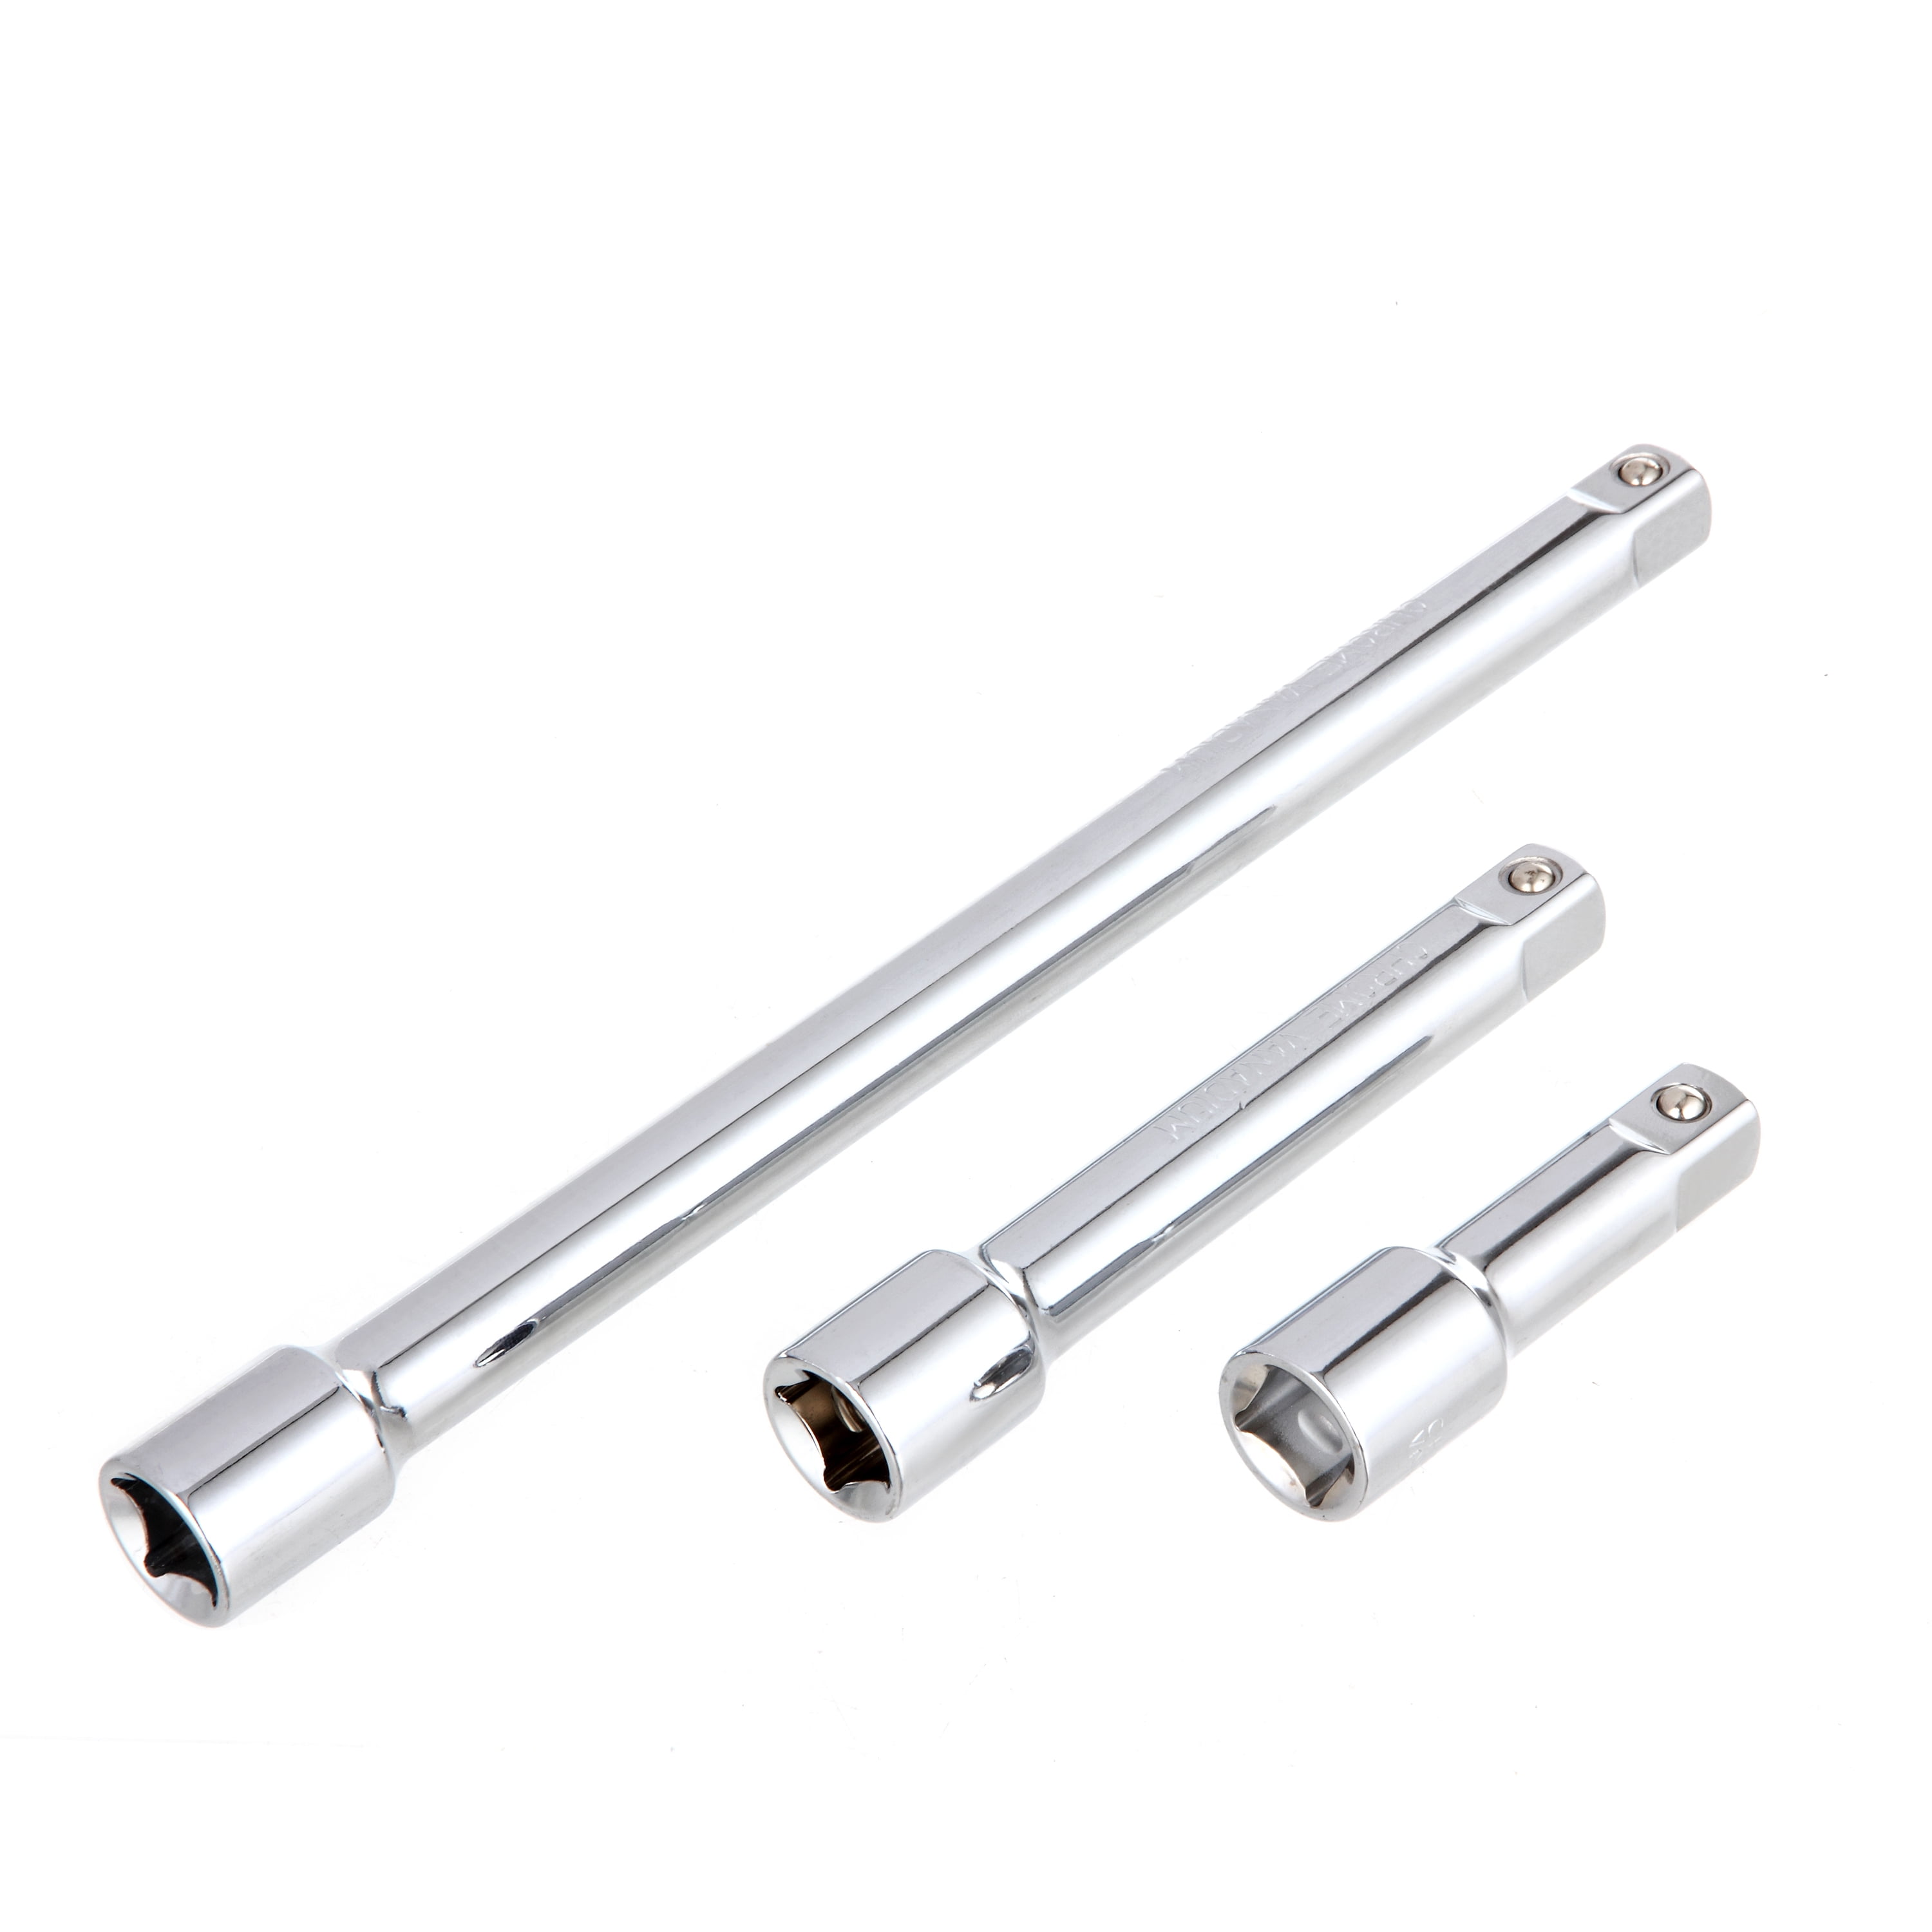 3Pce Extension Bar Set 3/8" Hardened Tempered Chrome-Plated And Polished 